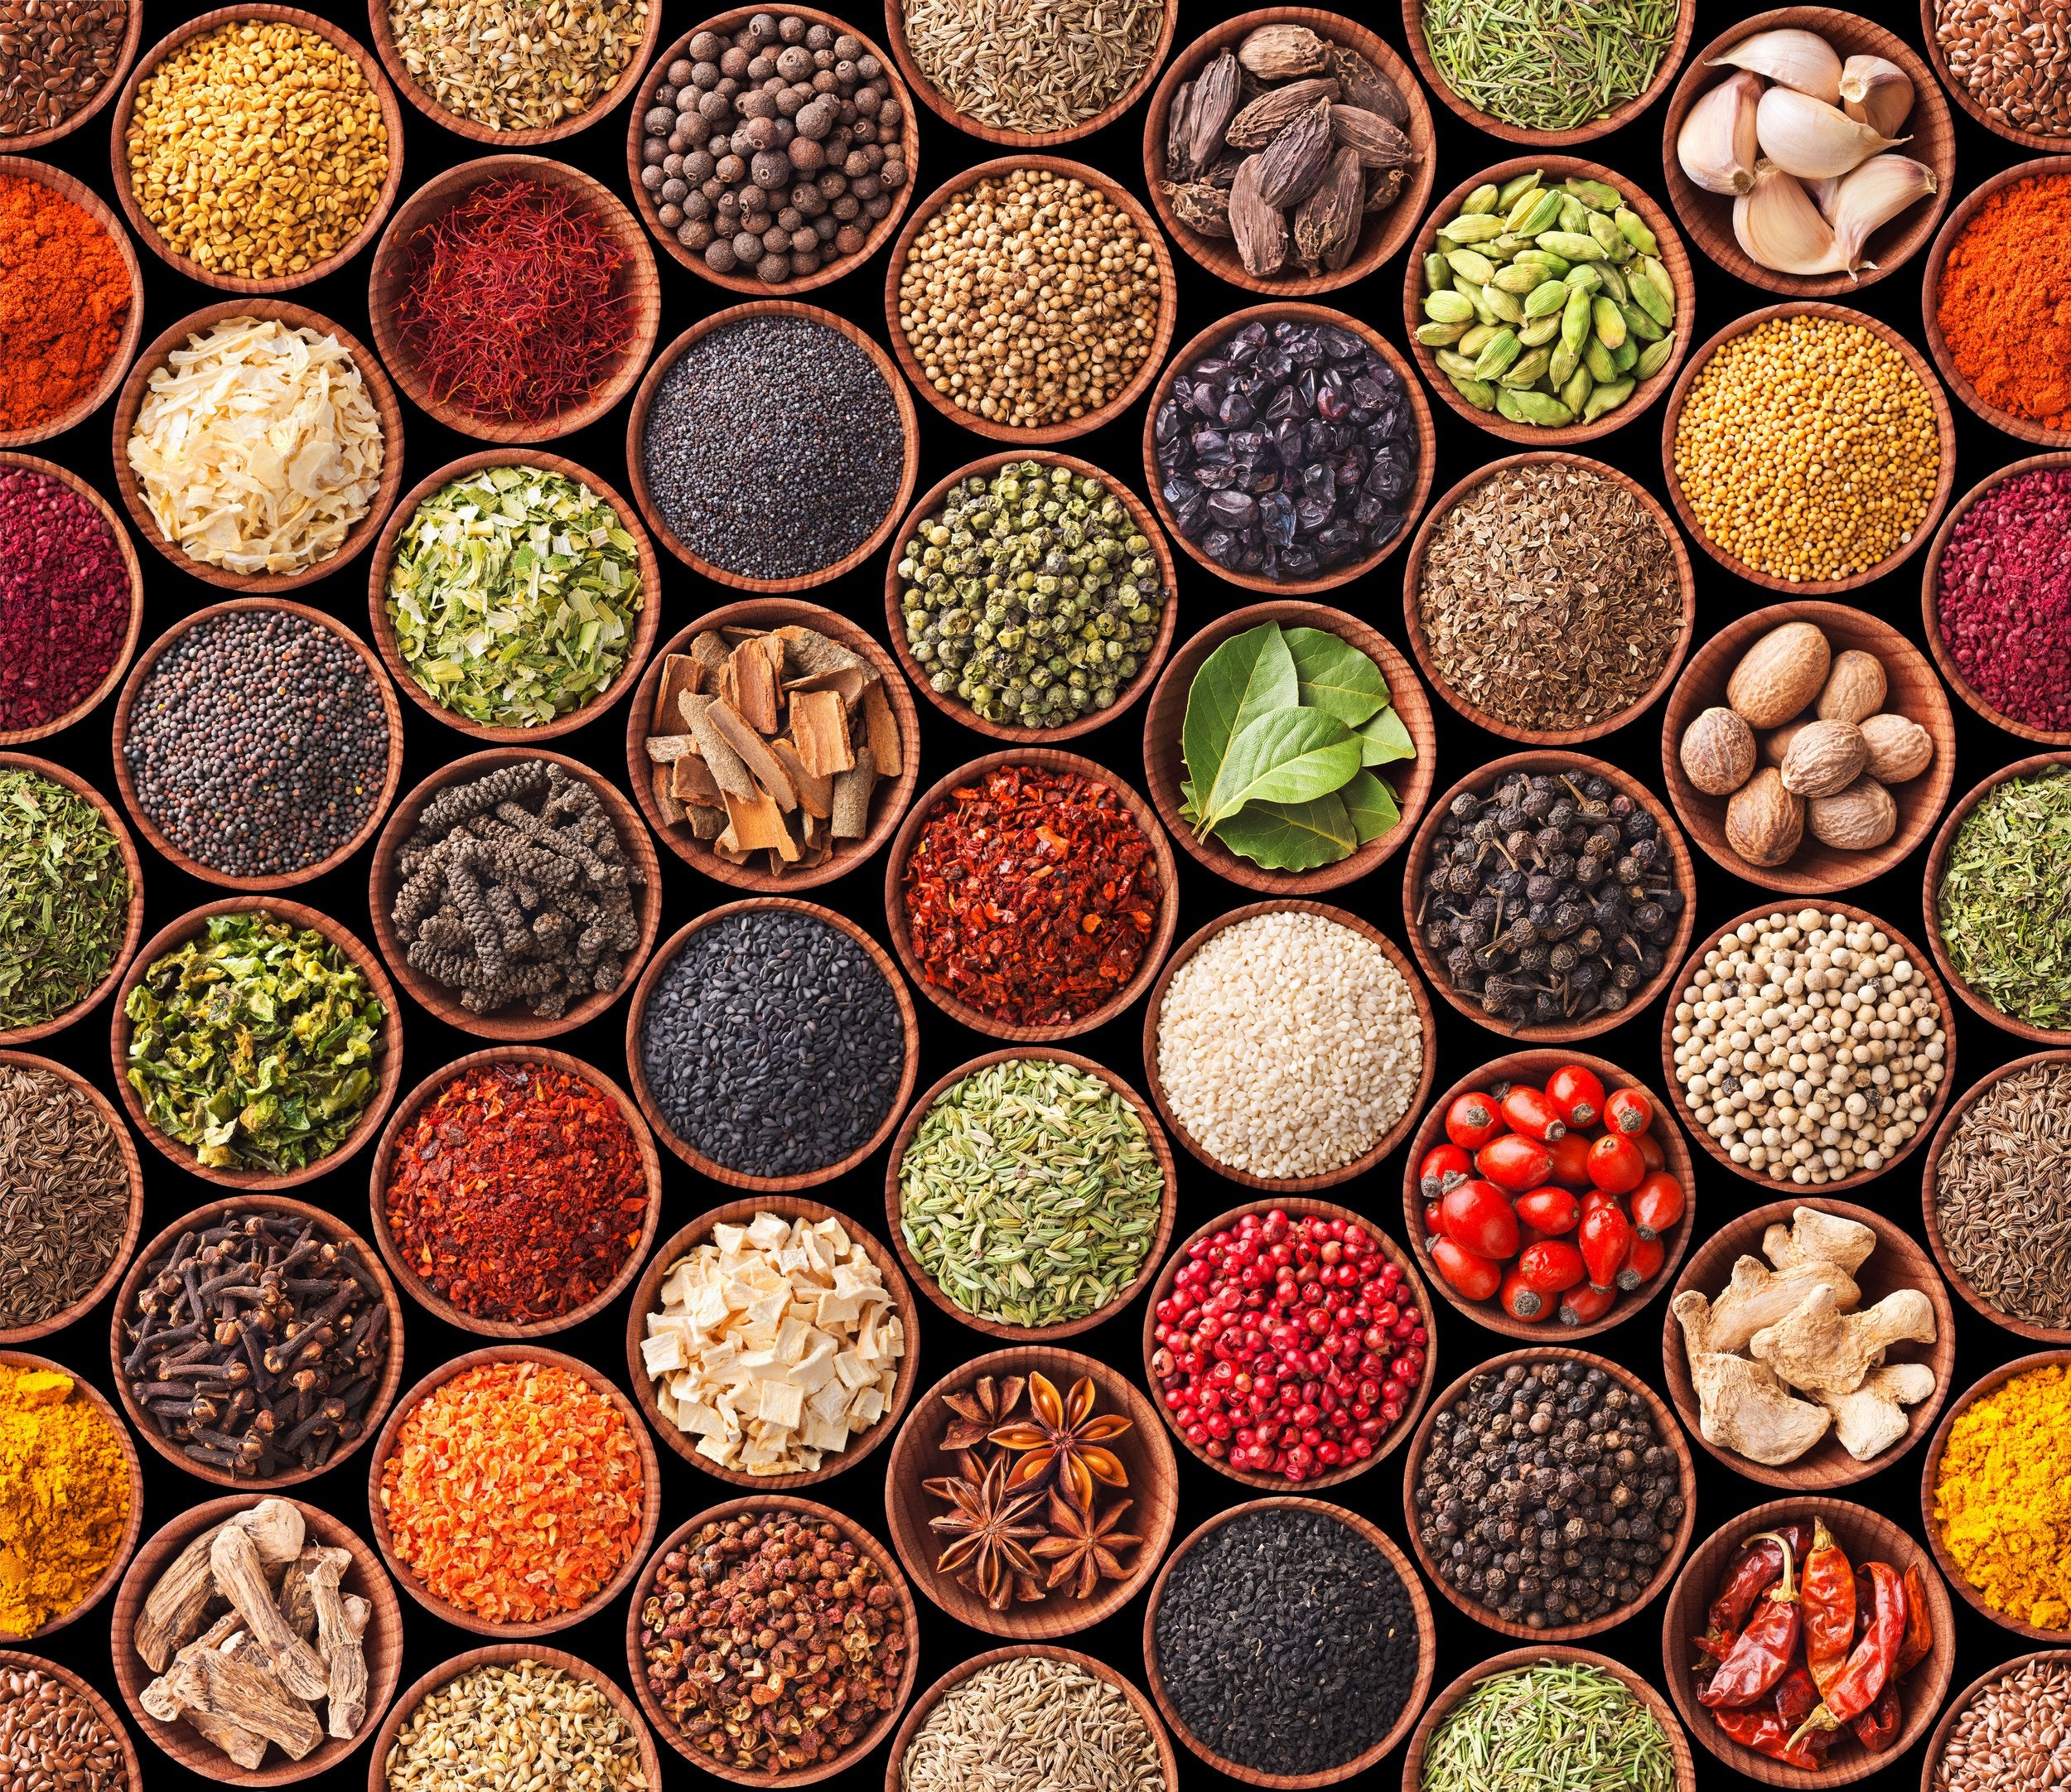 Herbs and Spices: